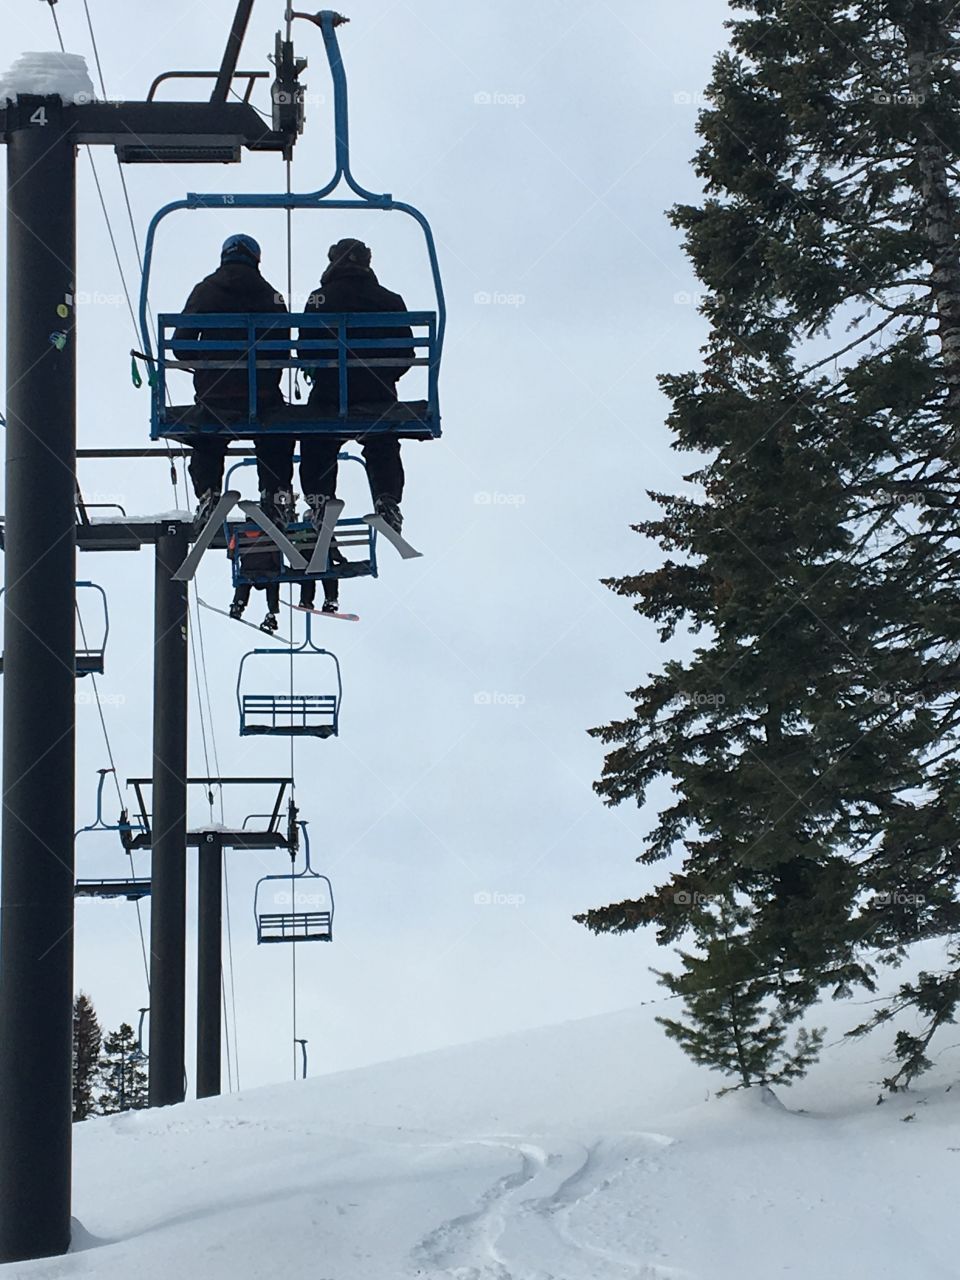 Two skiers on a ski lift